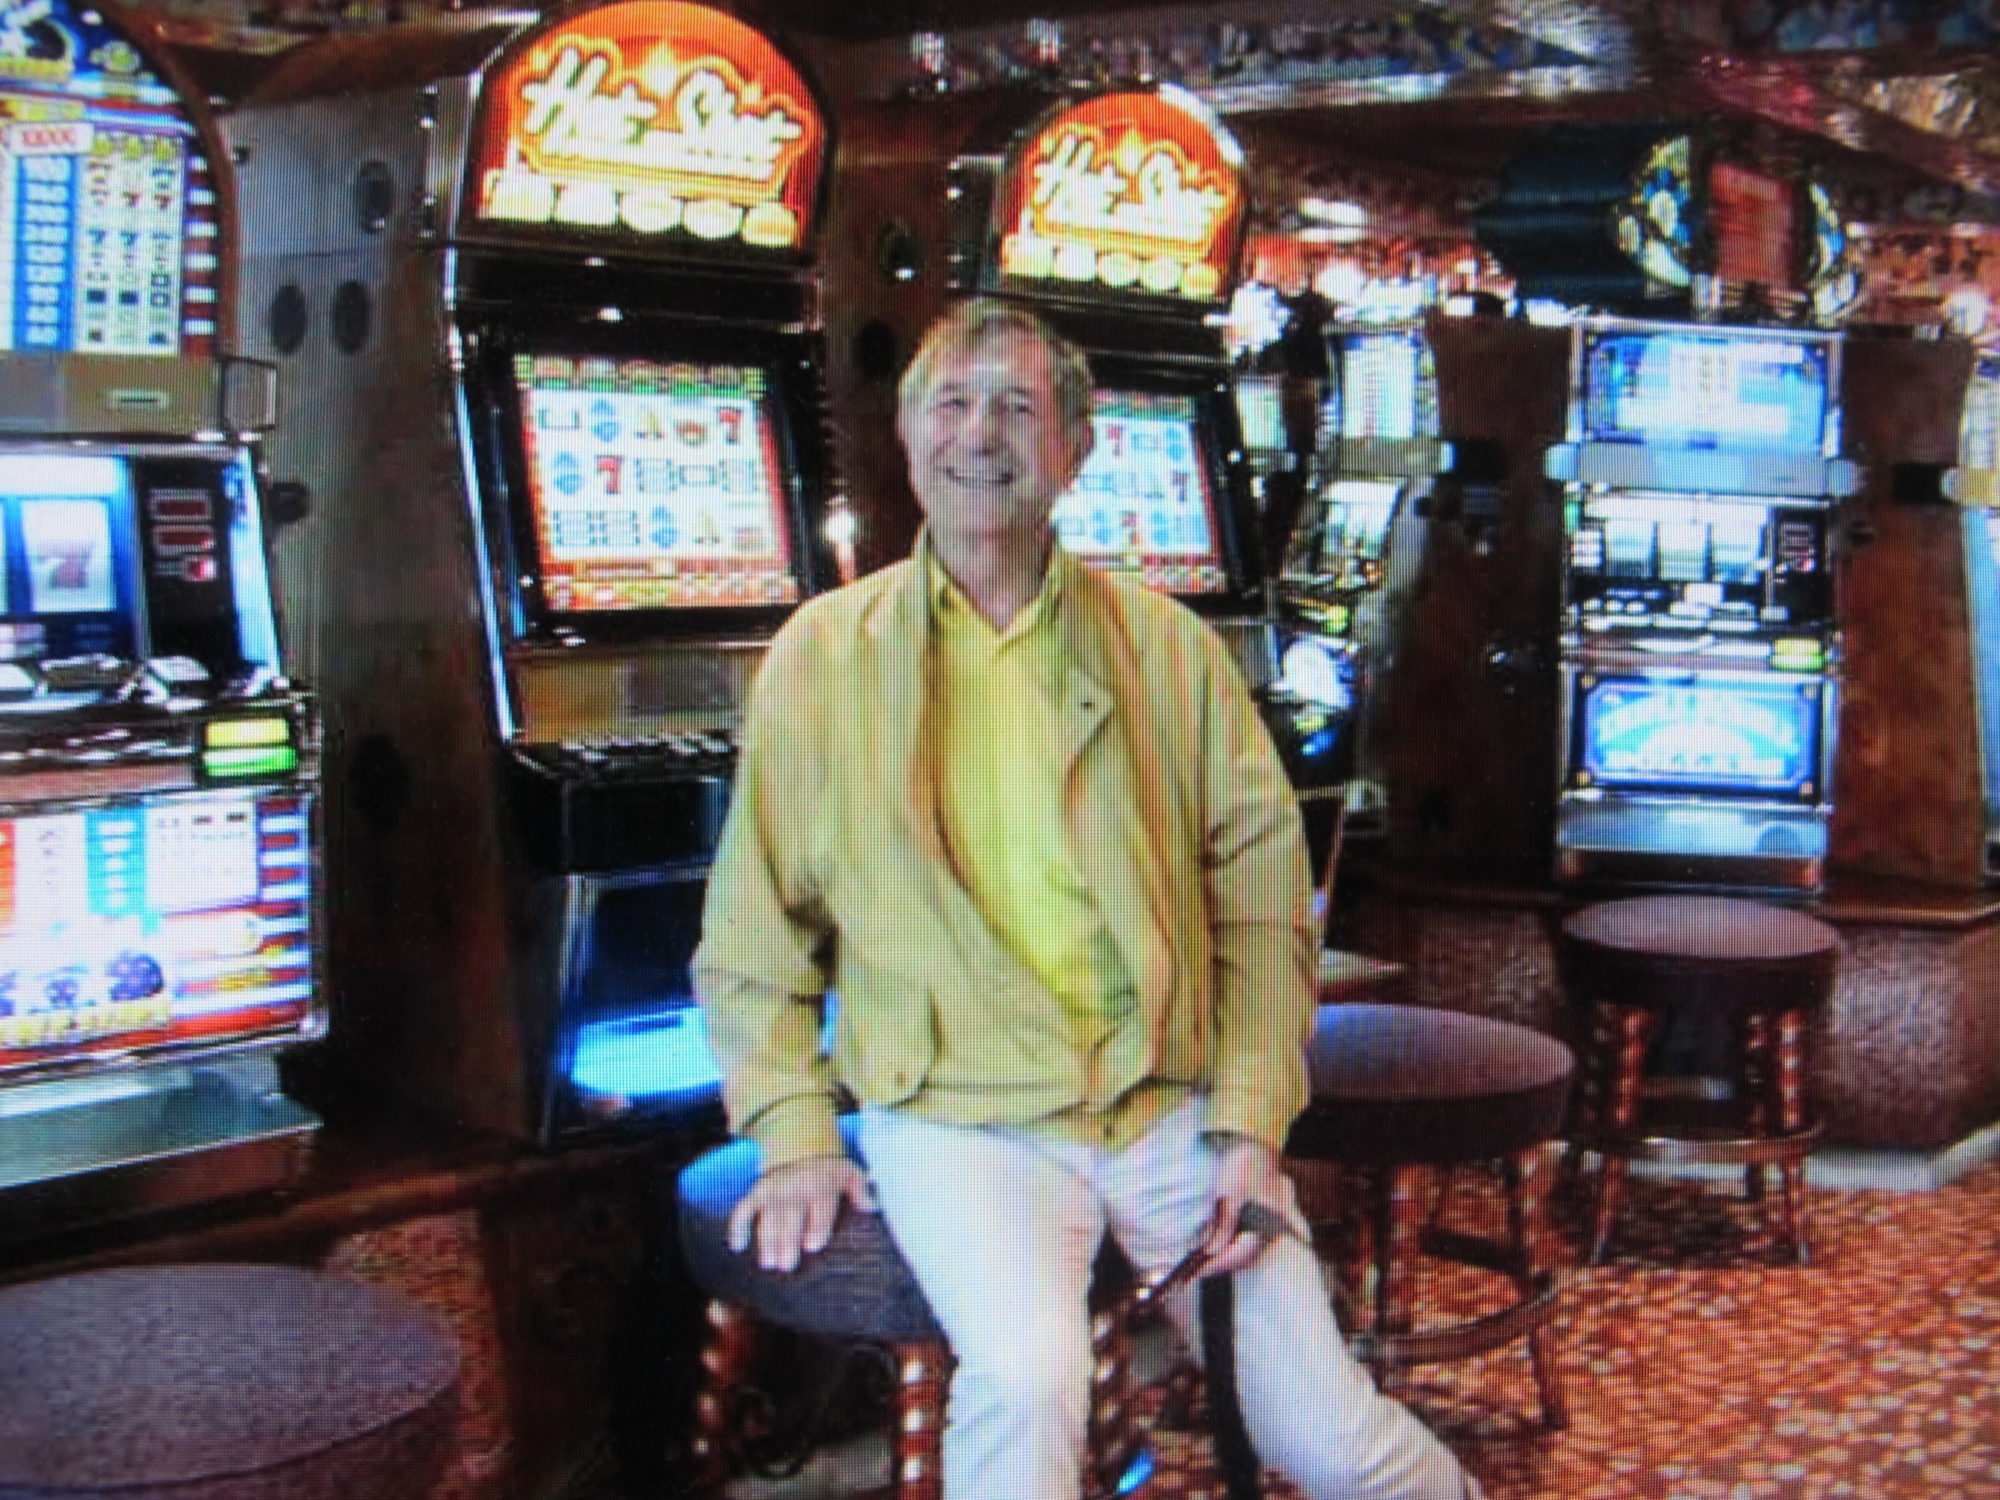 older man in yellow and khaki smiling on a stool in a casino